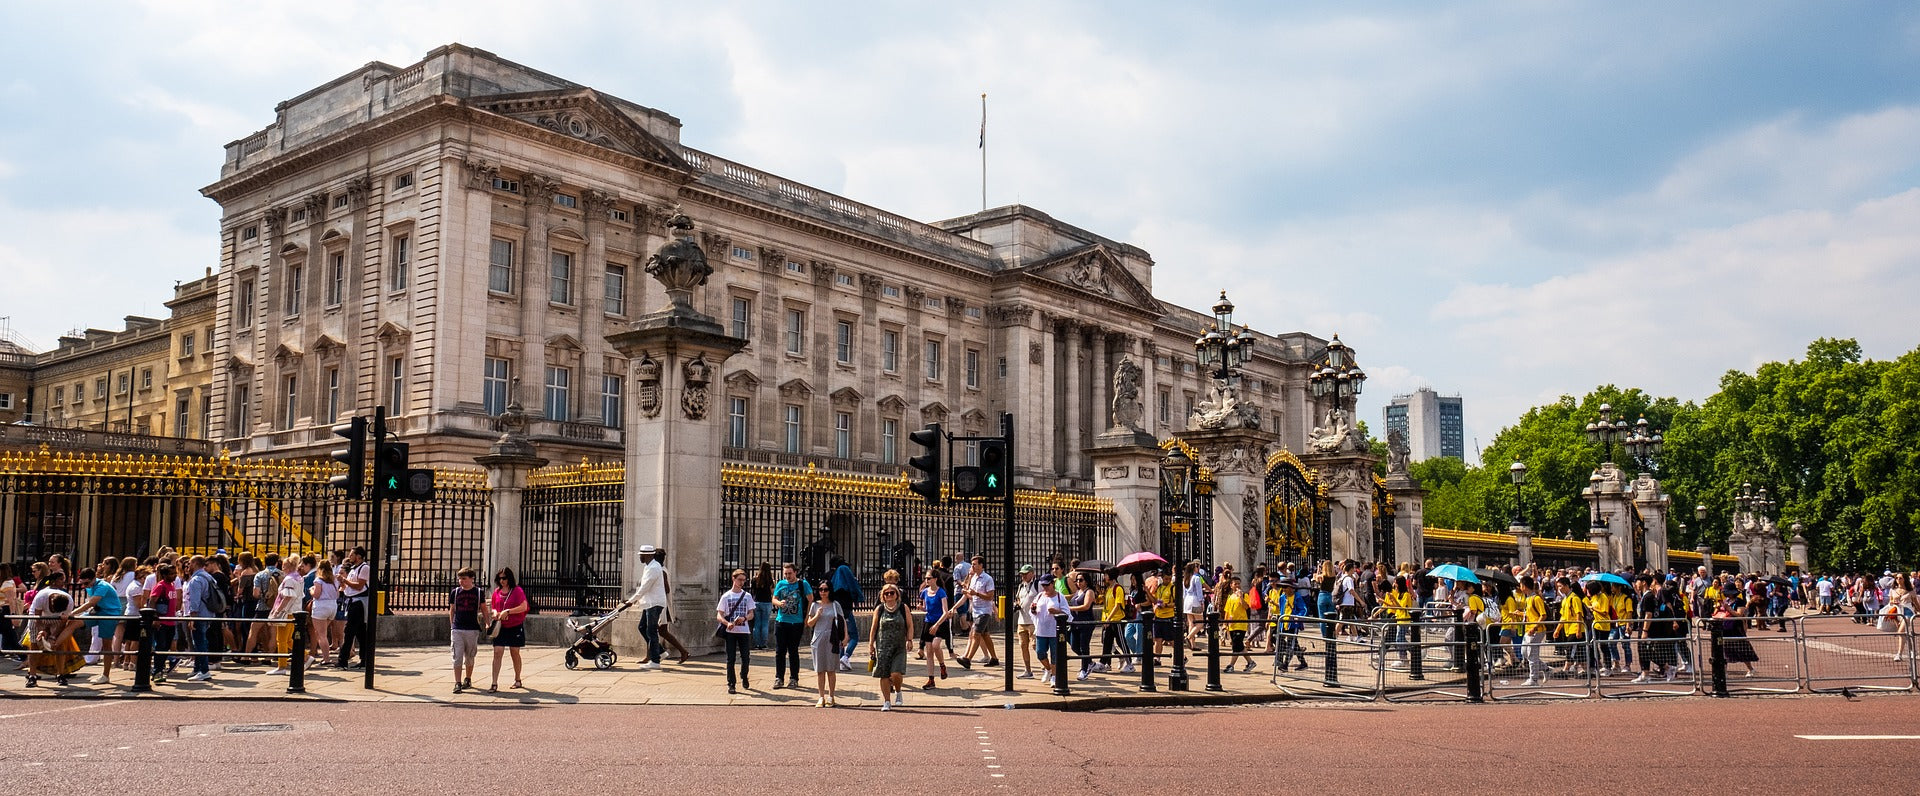 Inspirational People for Inspirational Times – Her Majesty Queen Elizabeth II - Buckingham Palace, none too shabby for your average 387 up, 388 down...